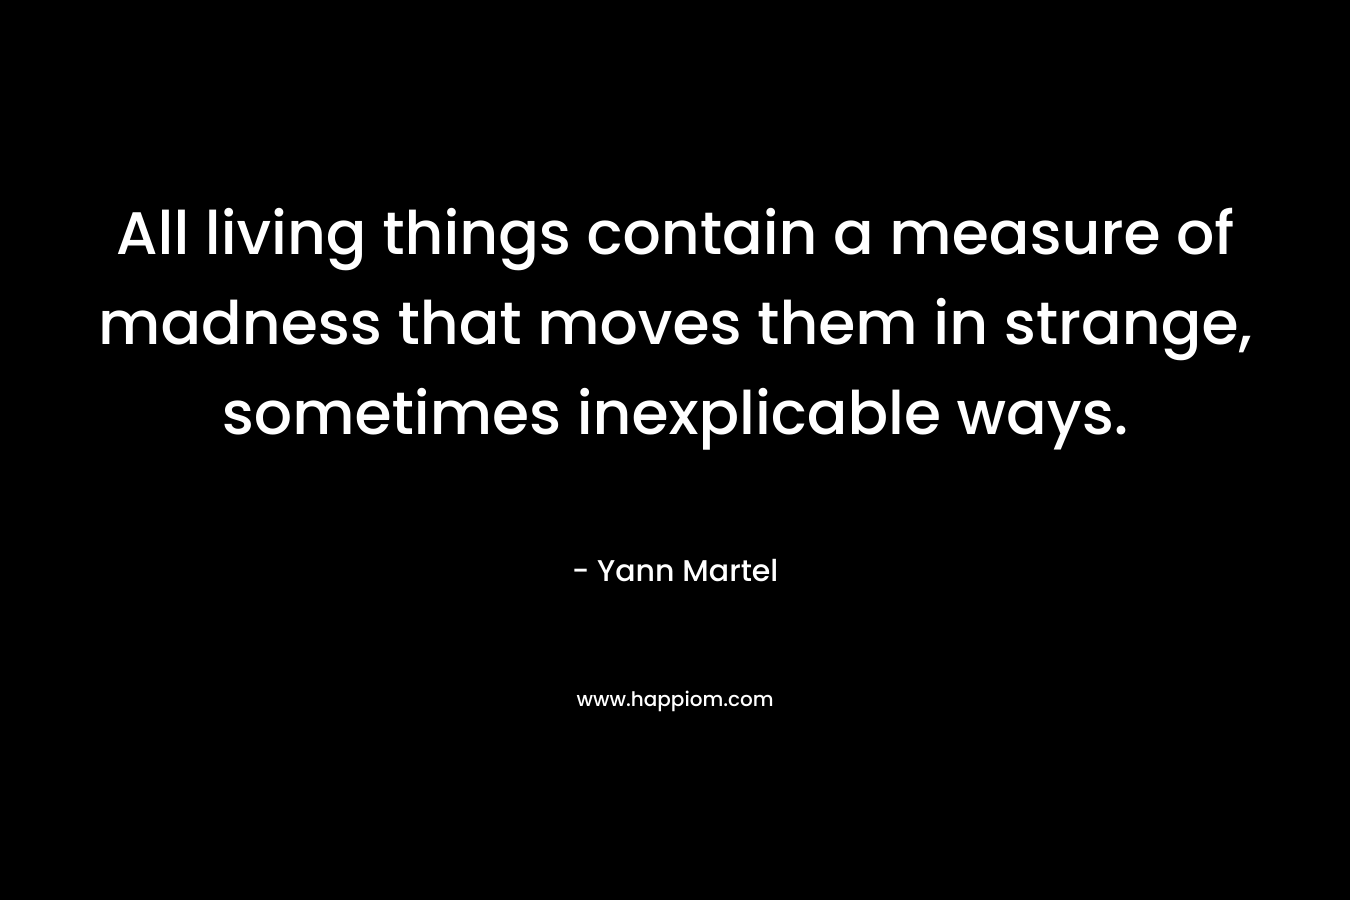 All living things contain a measure of madness that moves them in strange, sometimes inexplicable ways. – Yann Martel